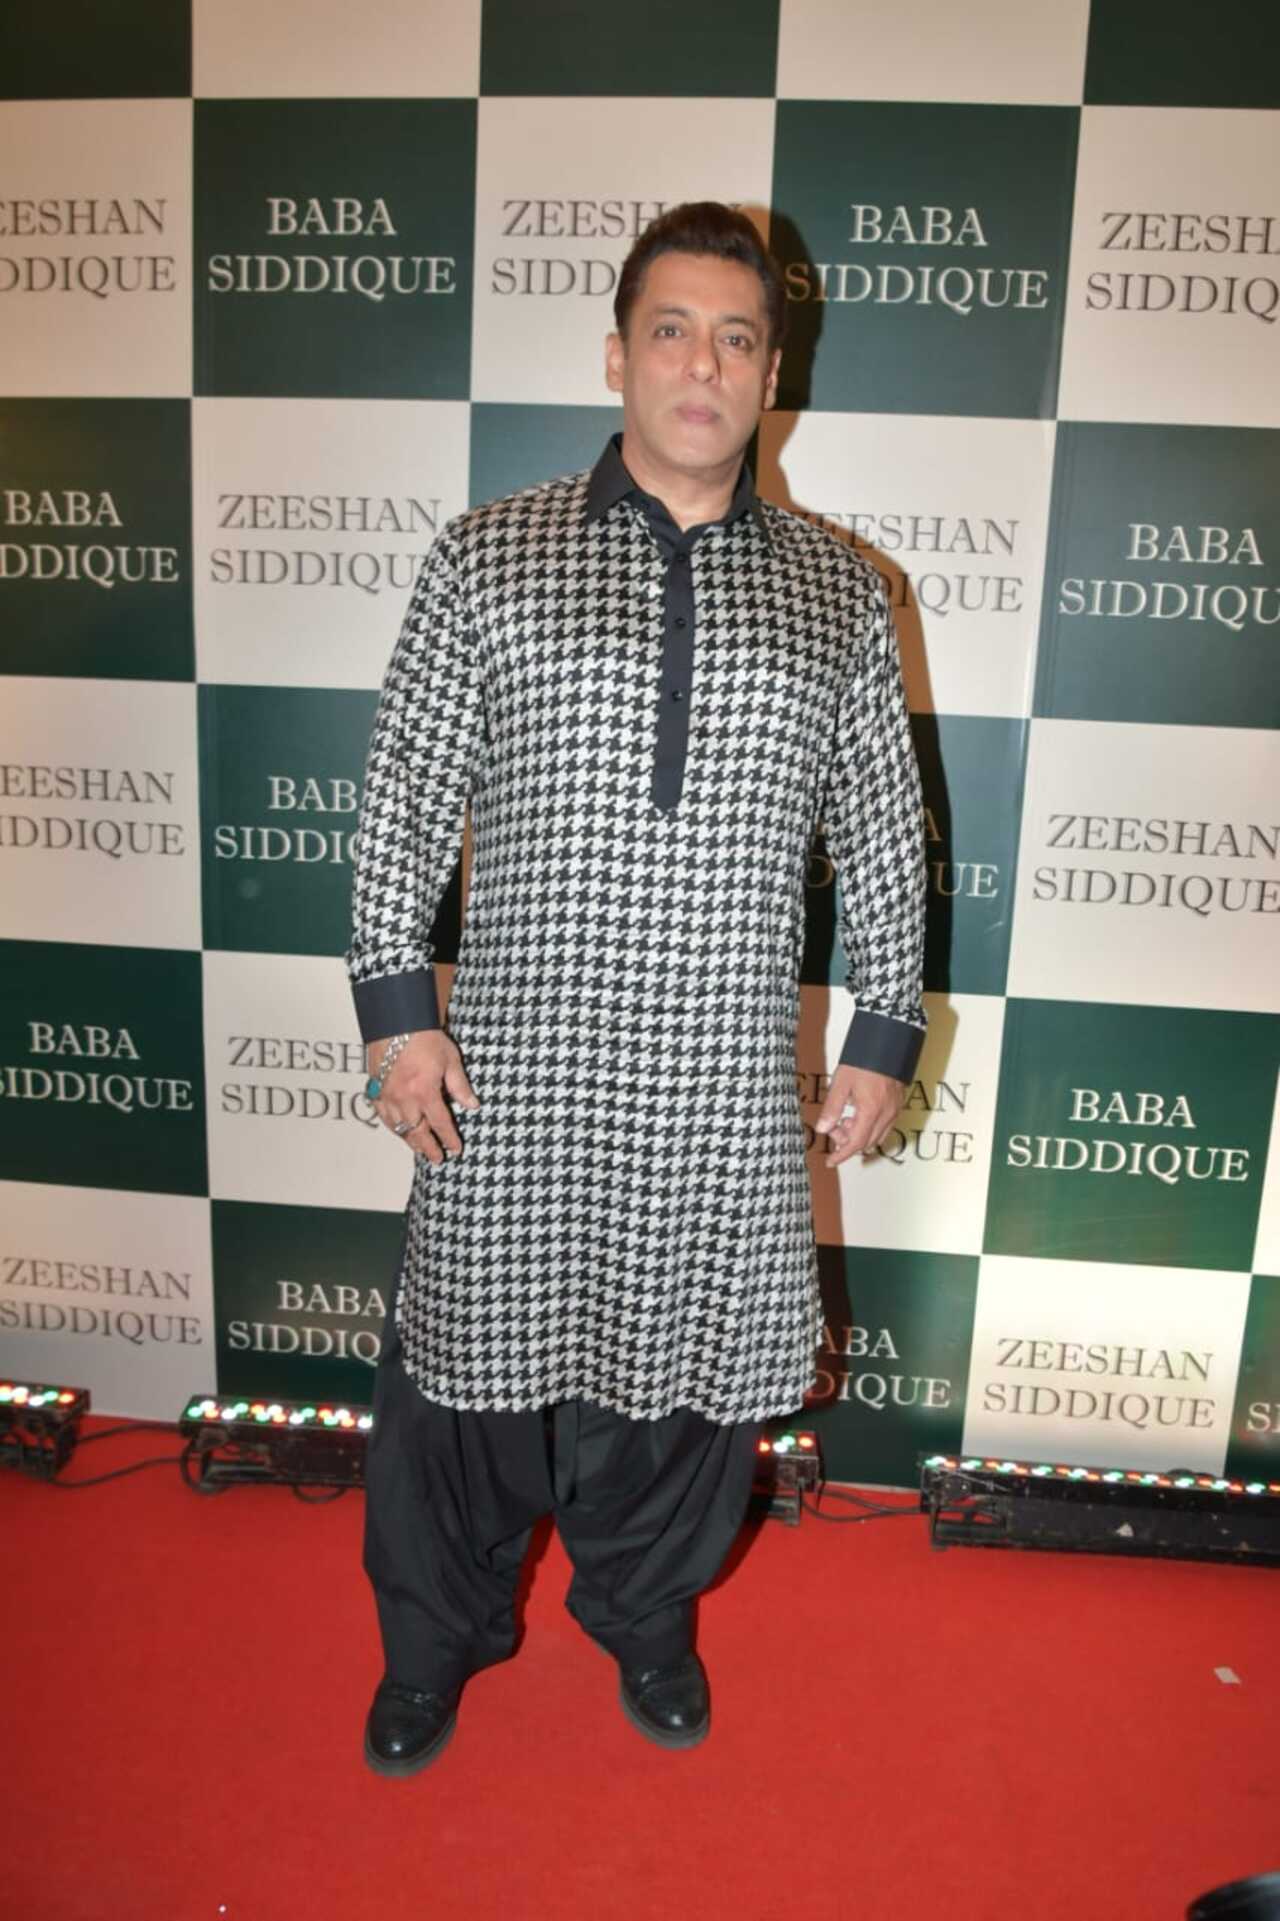 Salman Khan arrived in a grey kurta for the annual iftar party hosted by Baba Siddique and Zeeshan Siddque